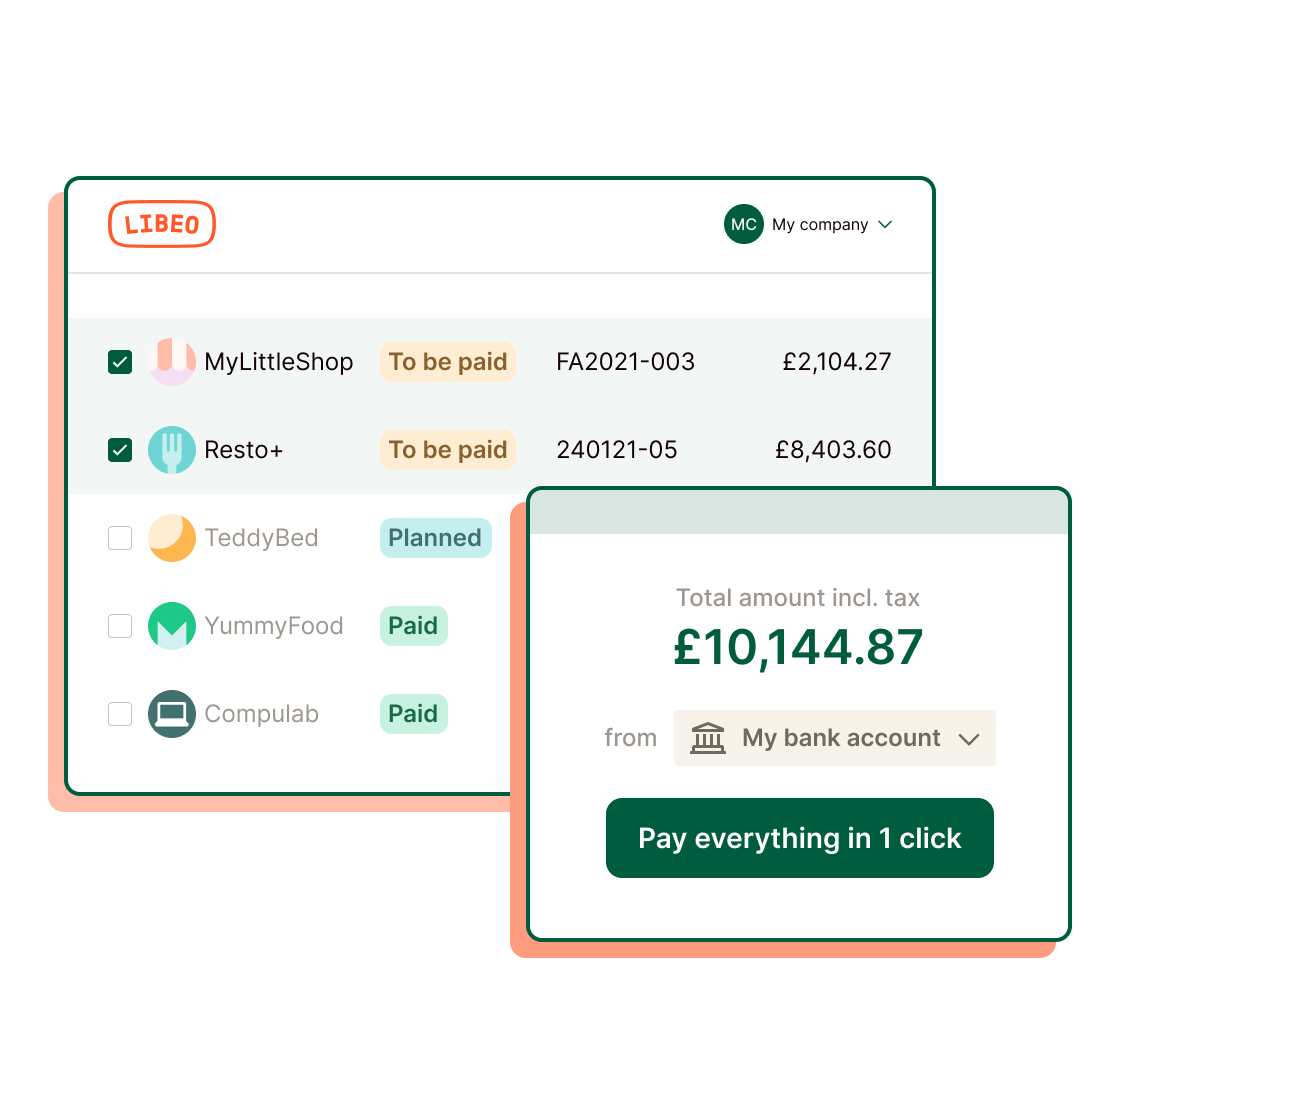 Libeo - Easily pay all your invoices